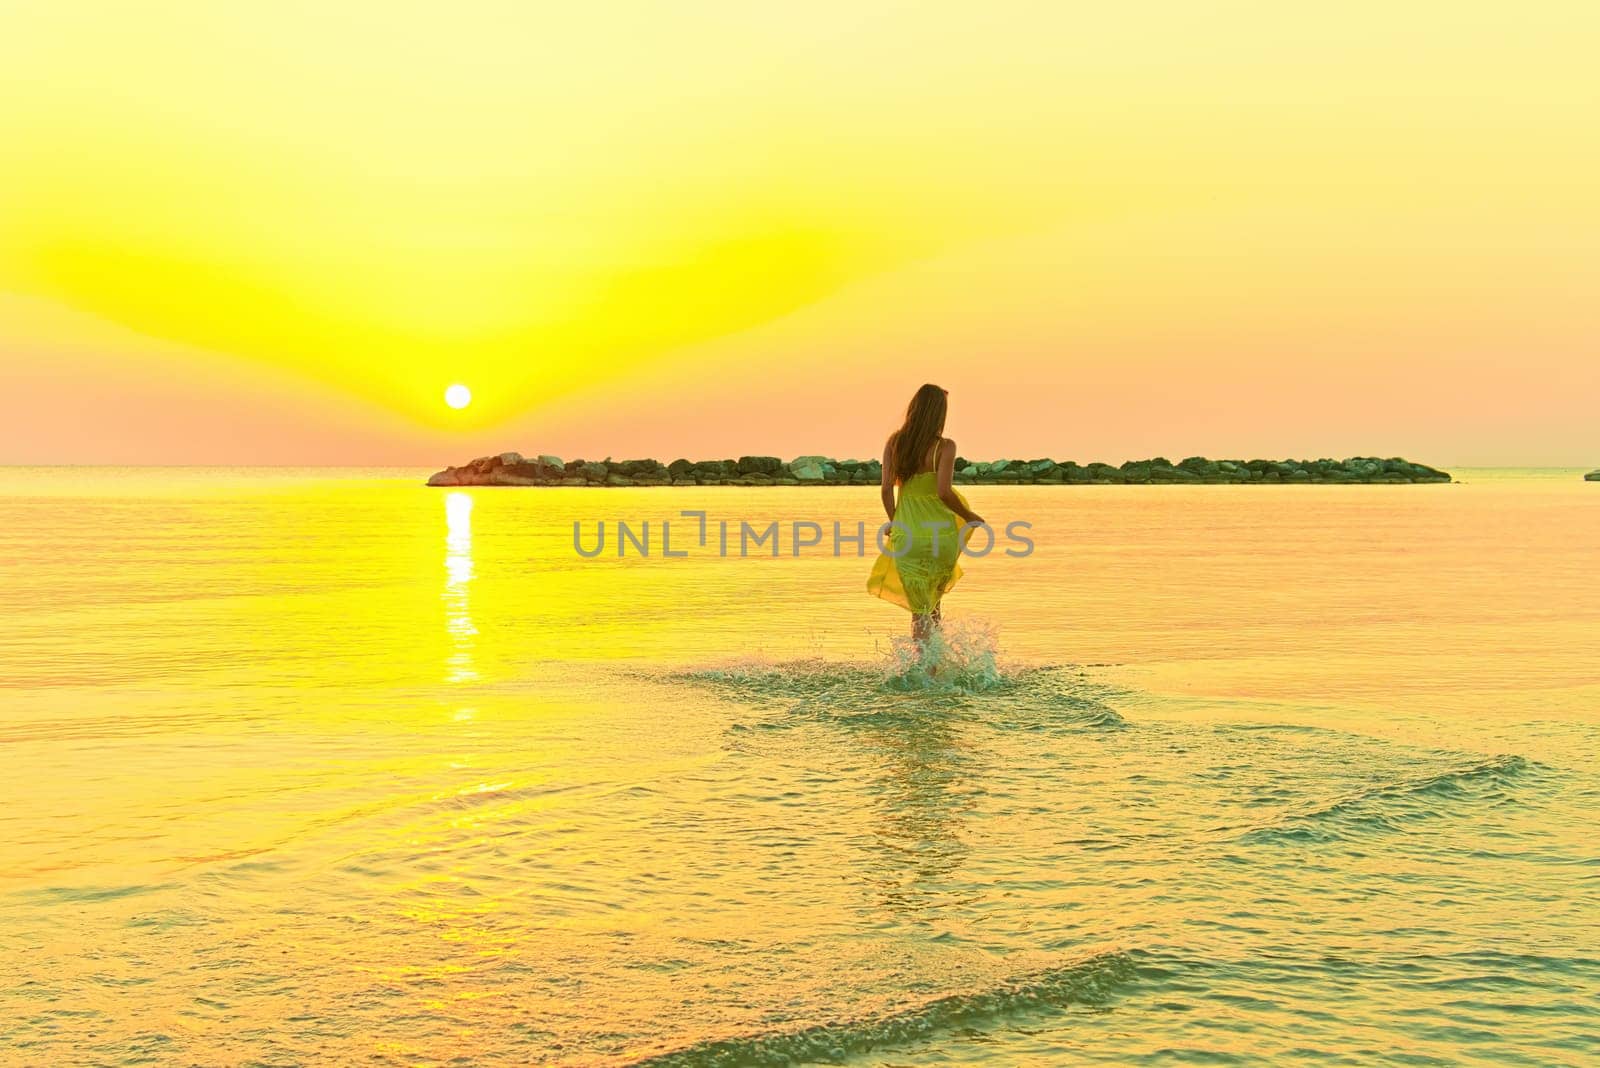 A young woman in a bright yellow dress meets the sunrise, joyfully runs through the sea water